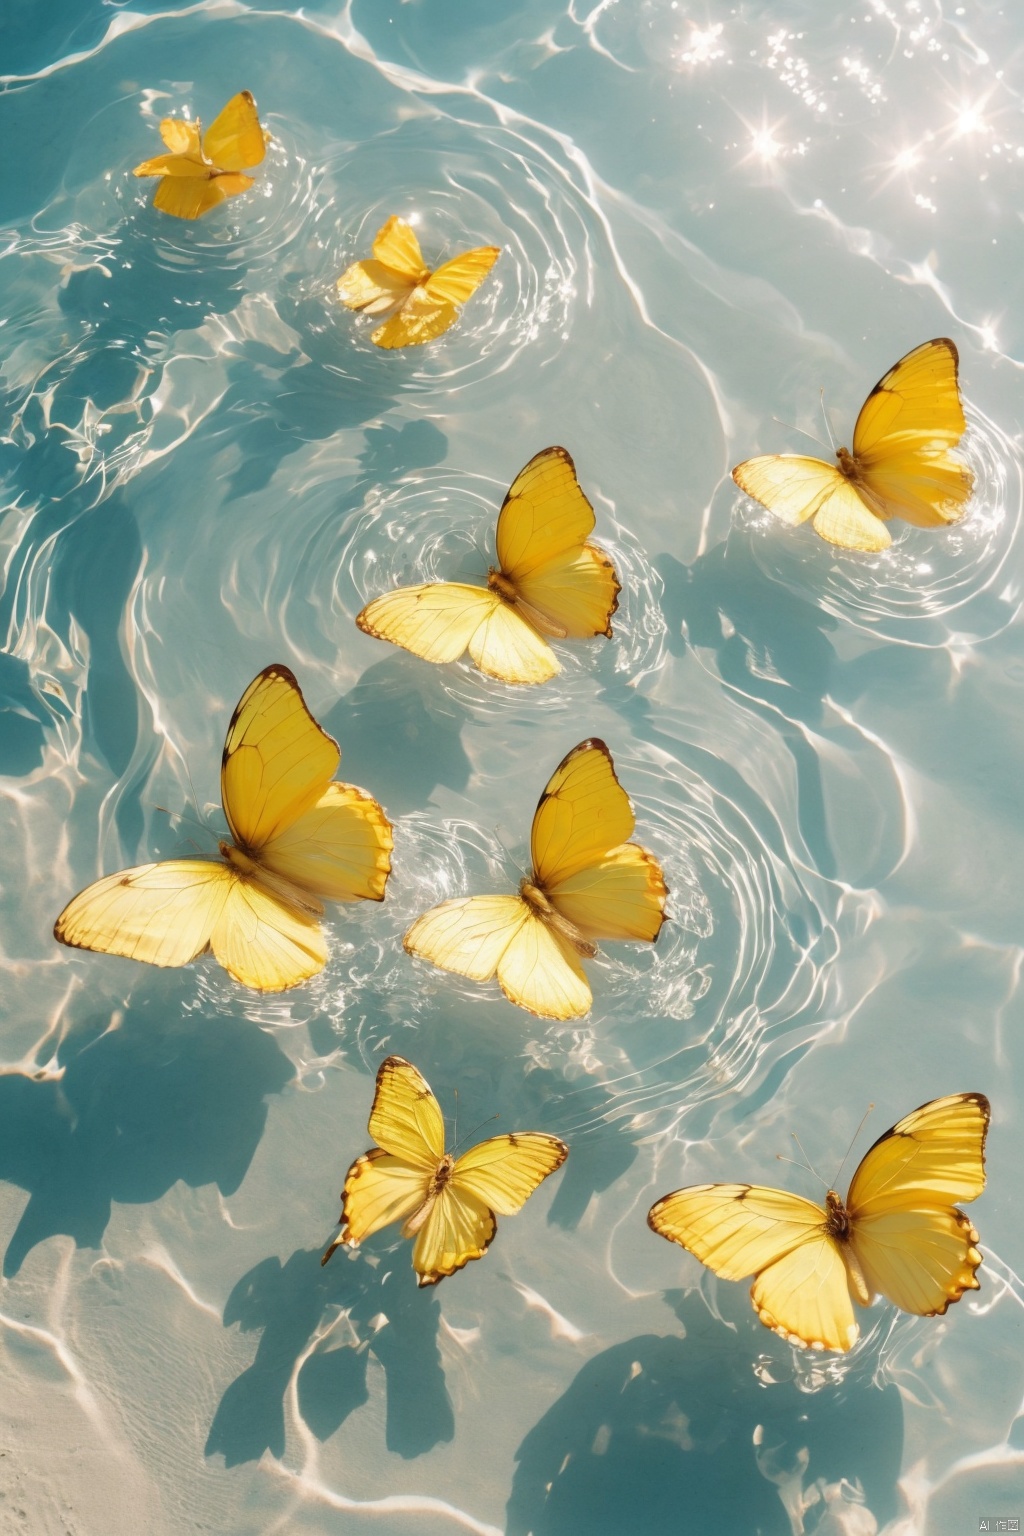  Water_butterfly,yellow butterfly,water,water ripples,beach